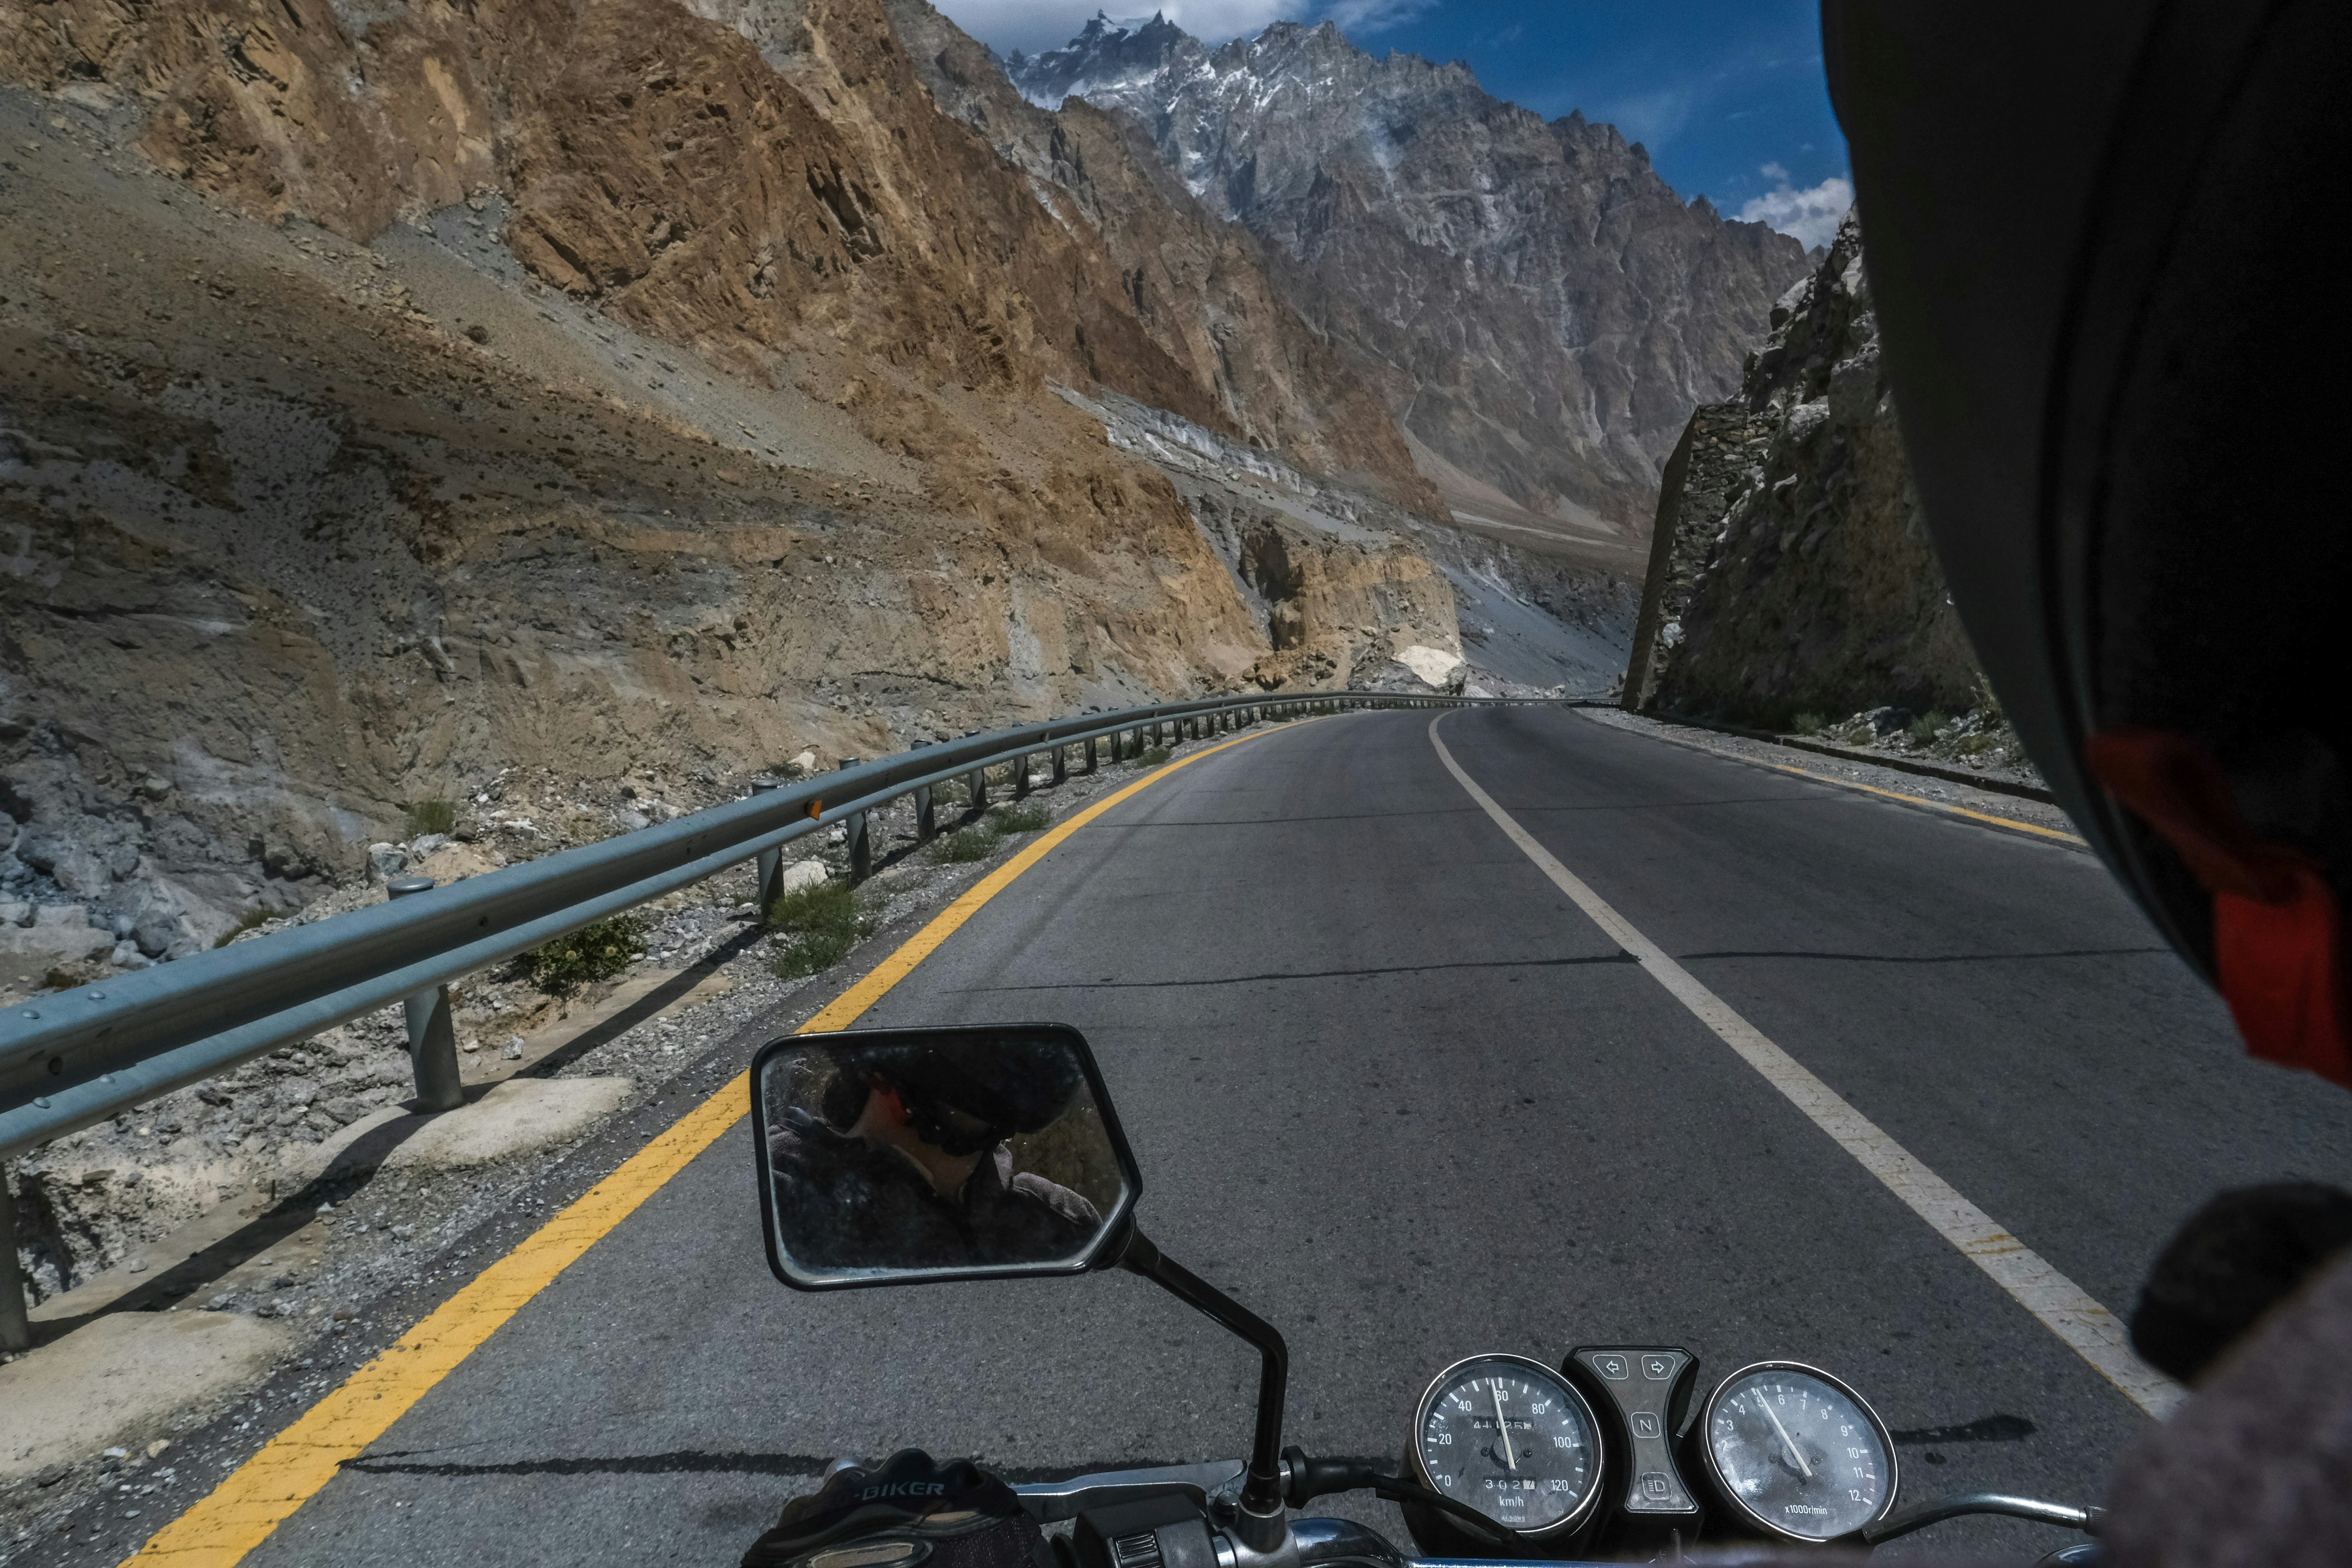 An over-the-shoulder shot of a motorcyclist driving on the roads of Northern Pakistan. The motorcycle's speedometer and wing mirror are visible in the foreground, while in the background, rocky mountains rise up on all sides.